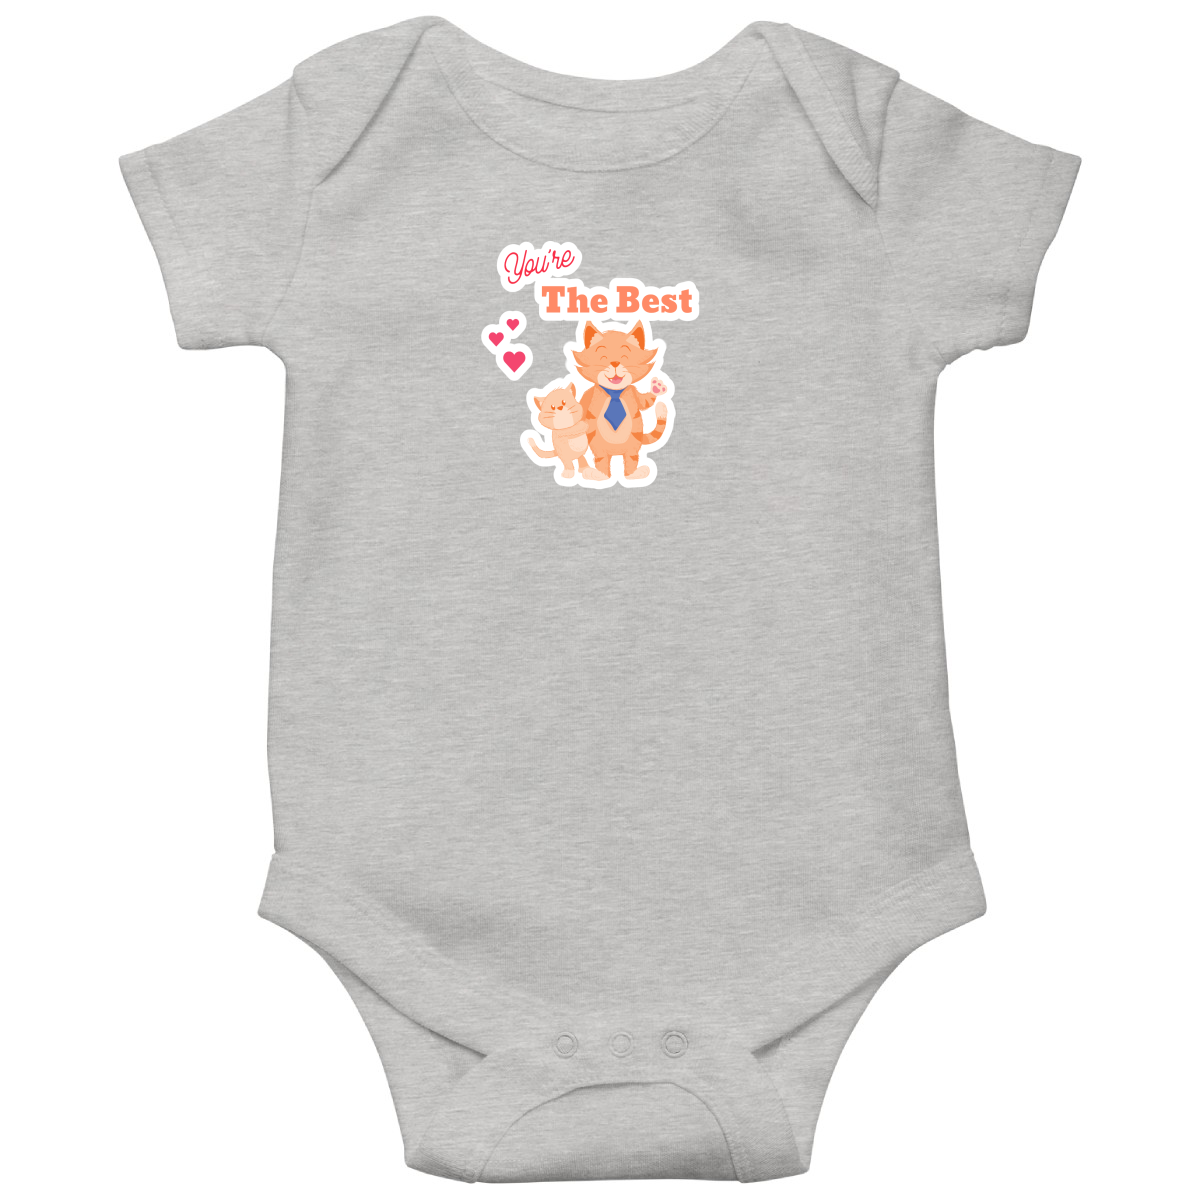 You are the Best Baby Bodysuits | Gray